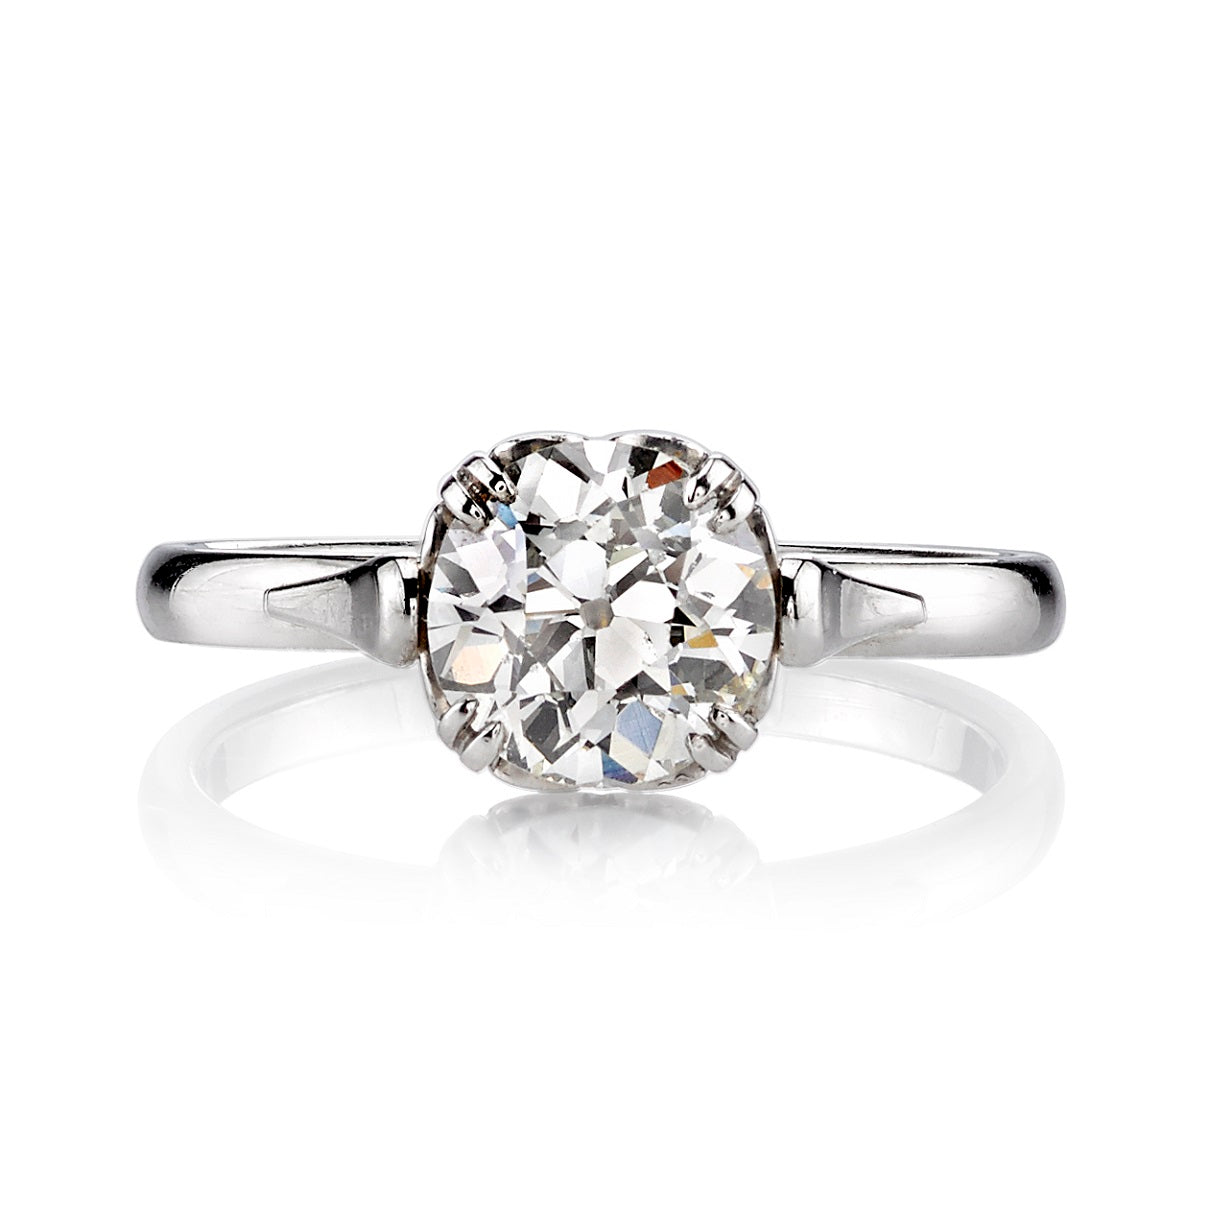 SINGLE STONE SYDNEE RING featuring 1.51ct J/VS1 EGL certified old European cut diamond set in a handcrafted platinum mounting.